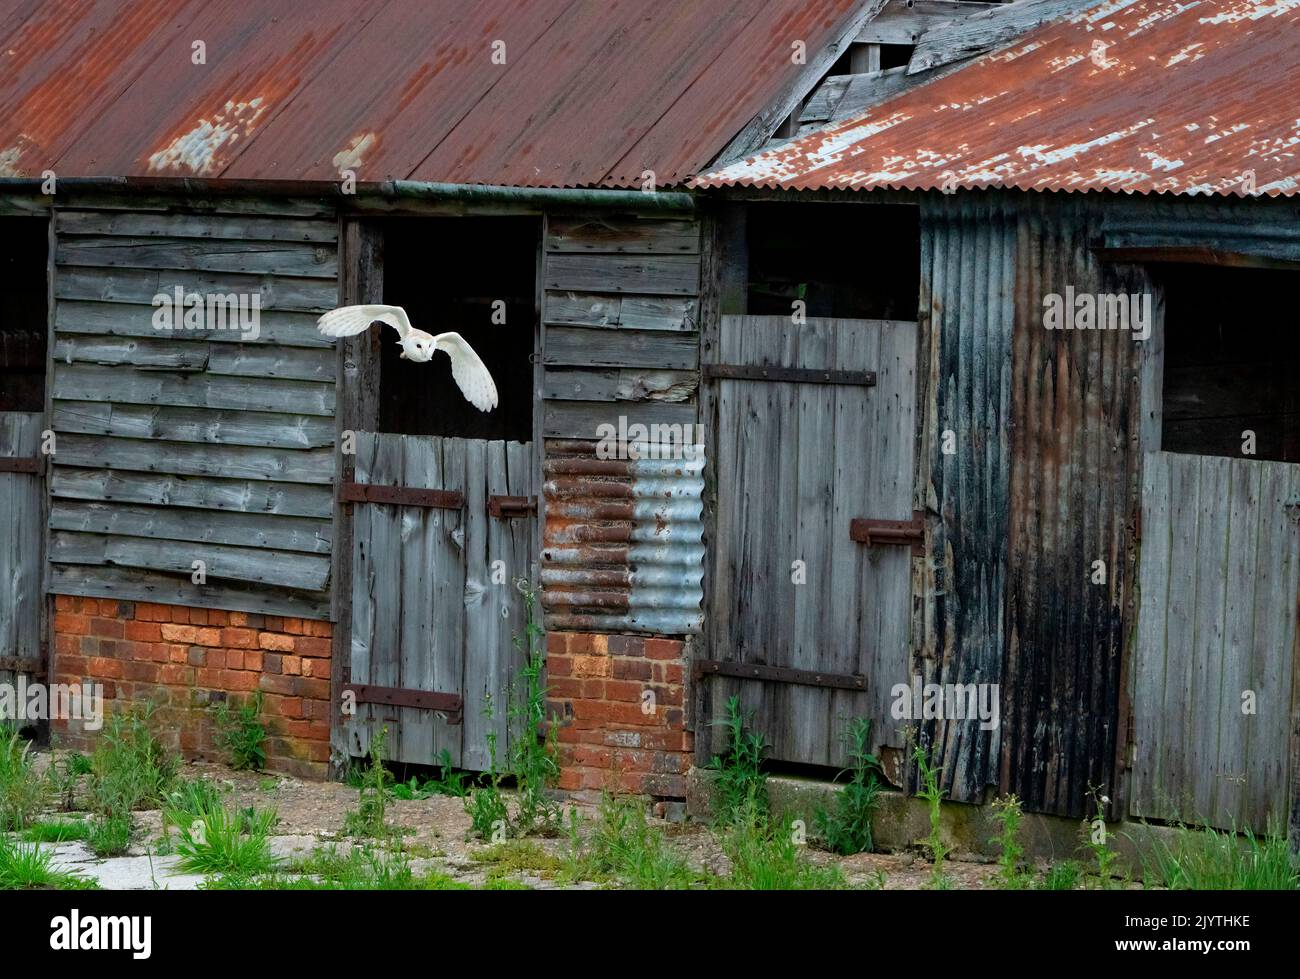 Barn owl (Tyto alba) coming out of an old barn, England Stock Photo